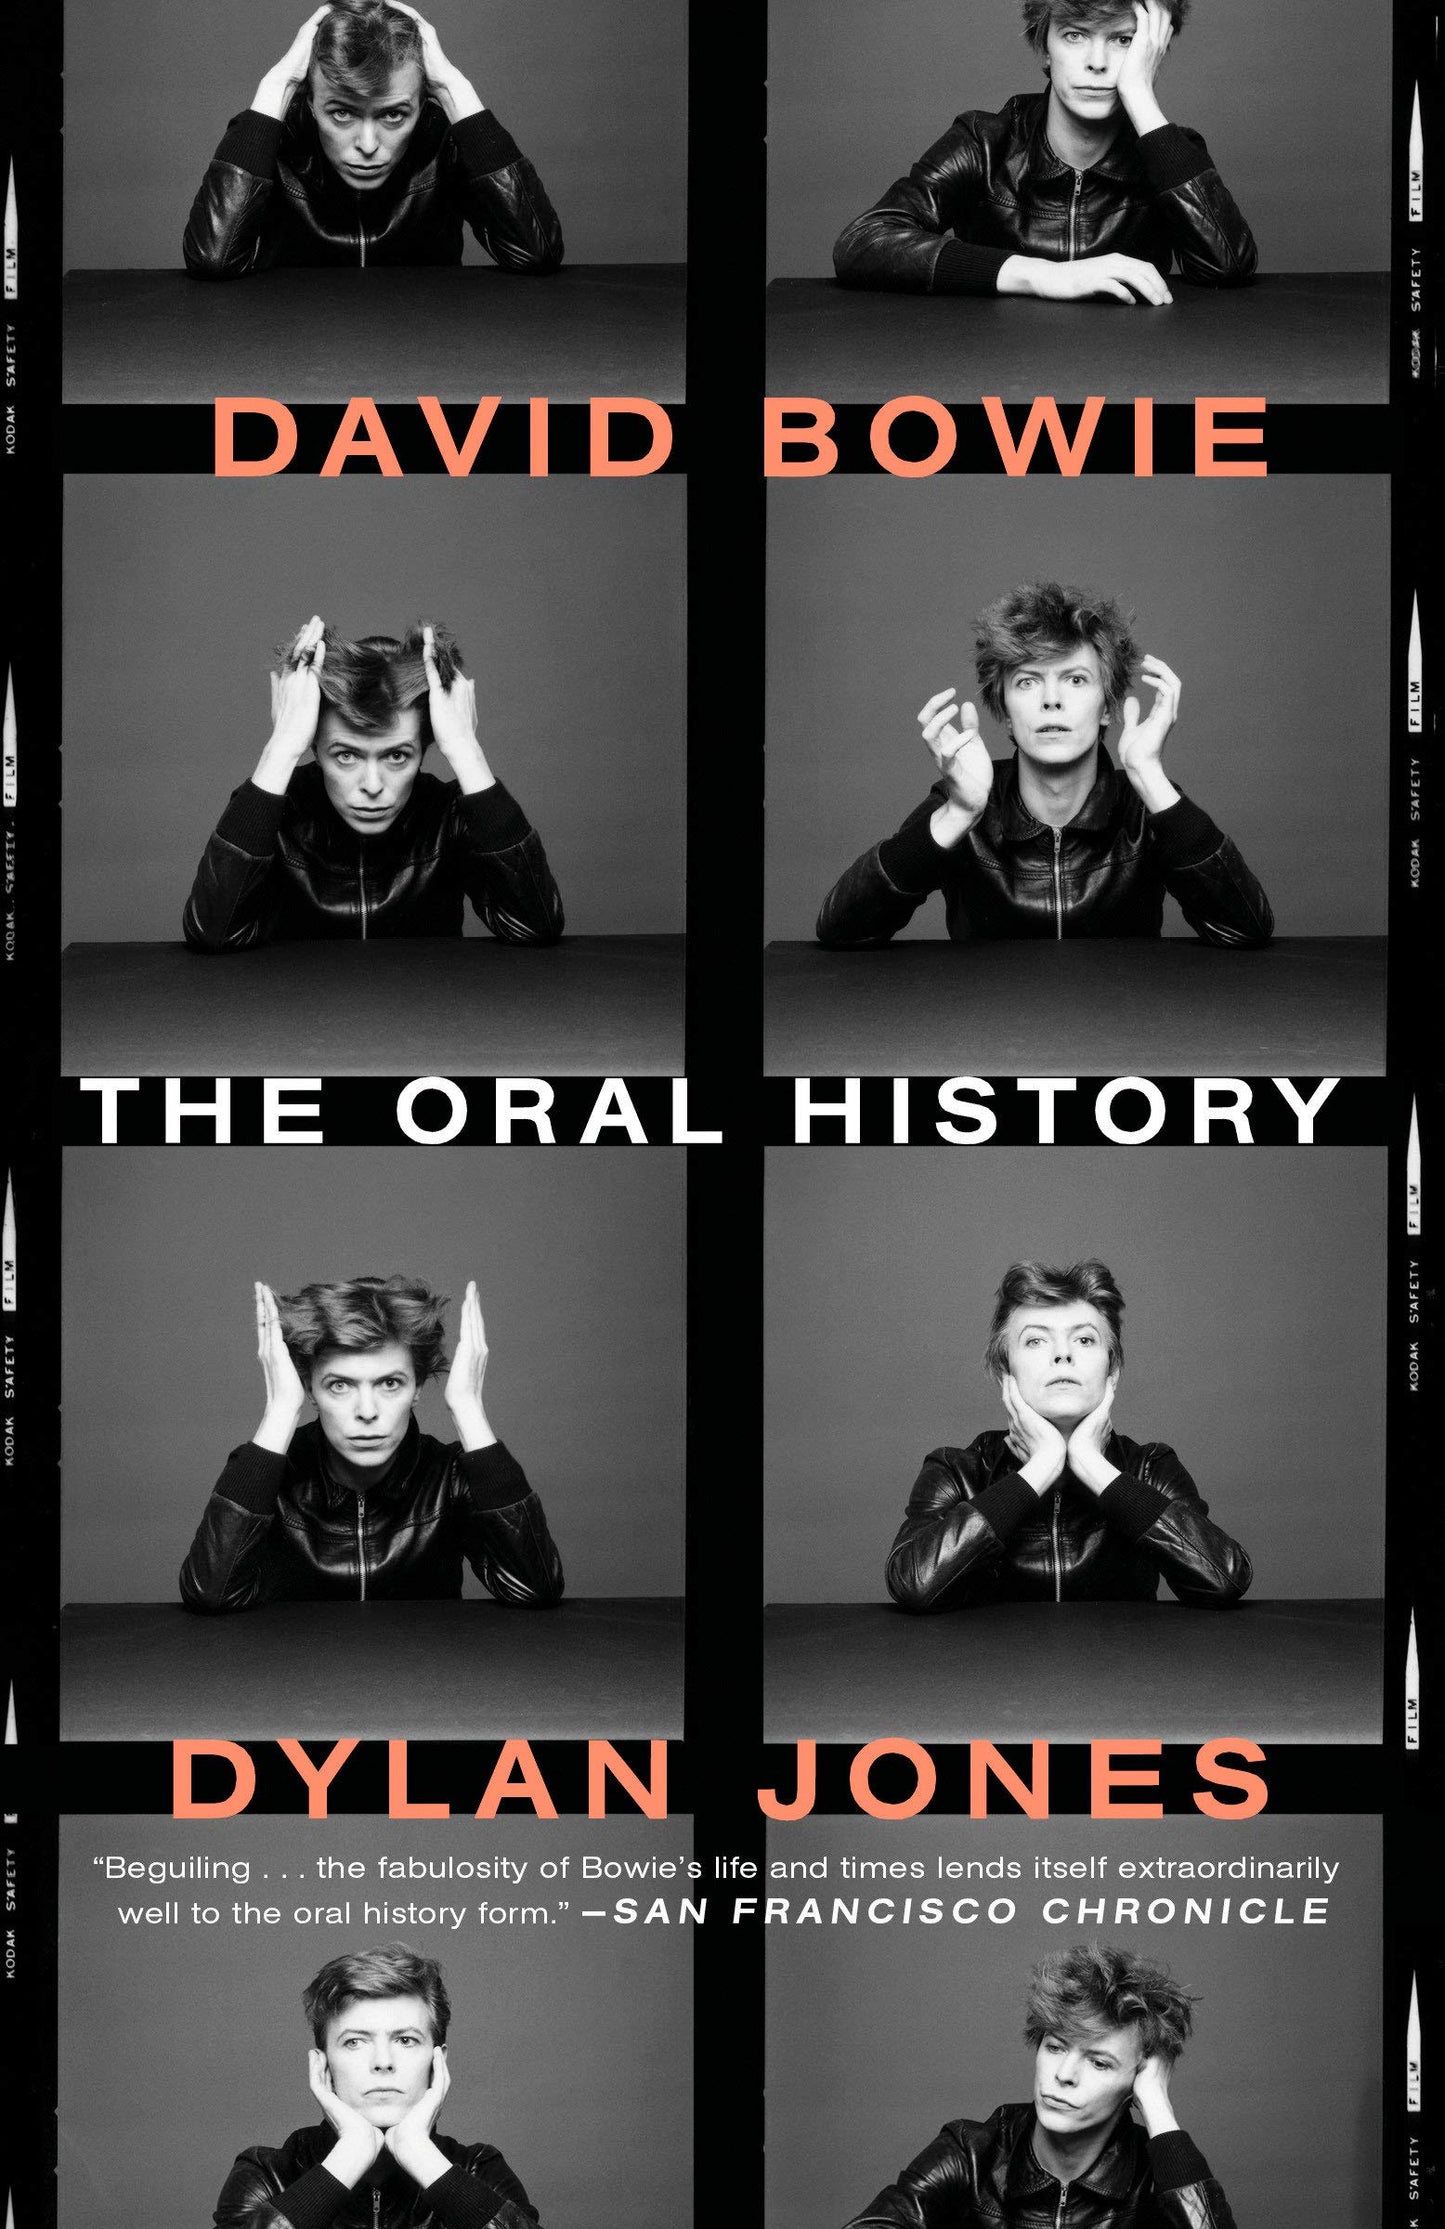 DAVID BOWIE - THE ORAL HISTORY - PAPERBACK - BOOK